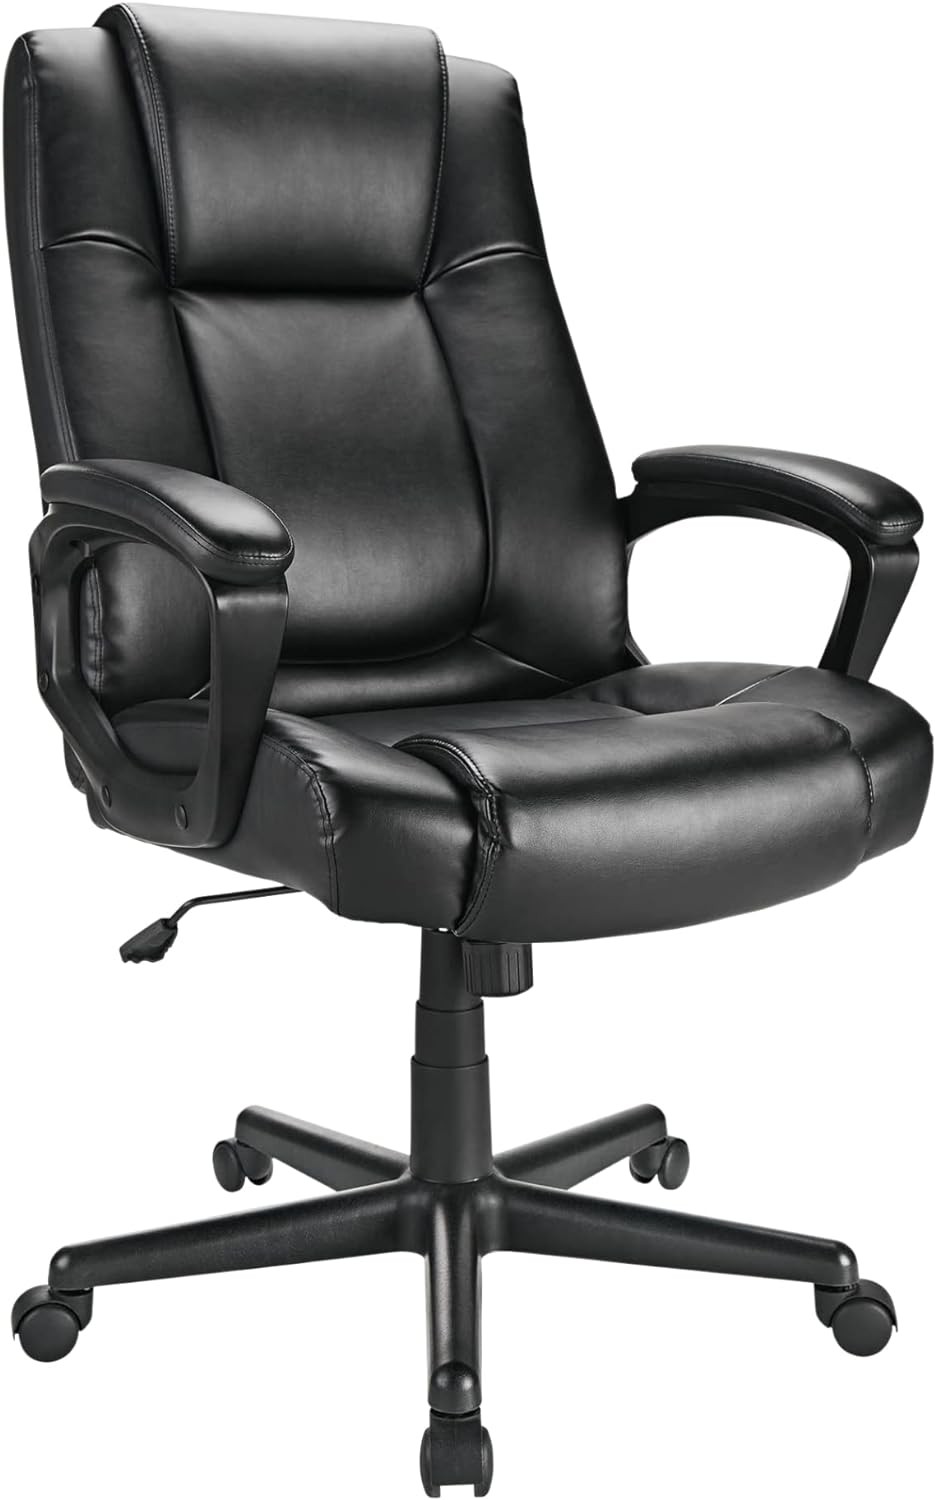 Realspace® Hurston Bonded Leather High-Back Executive Chair, Black